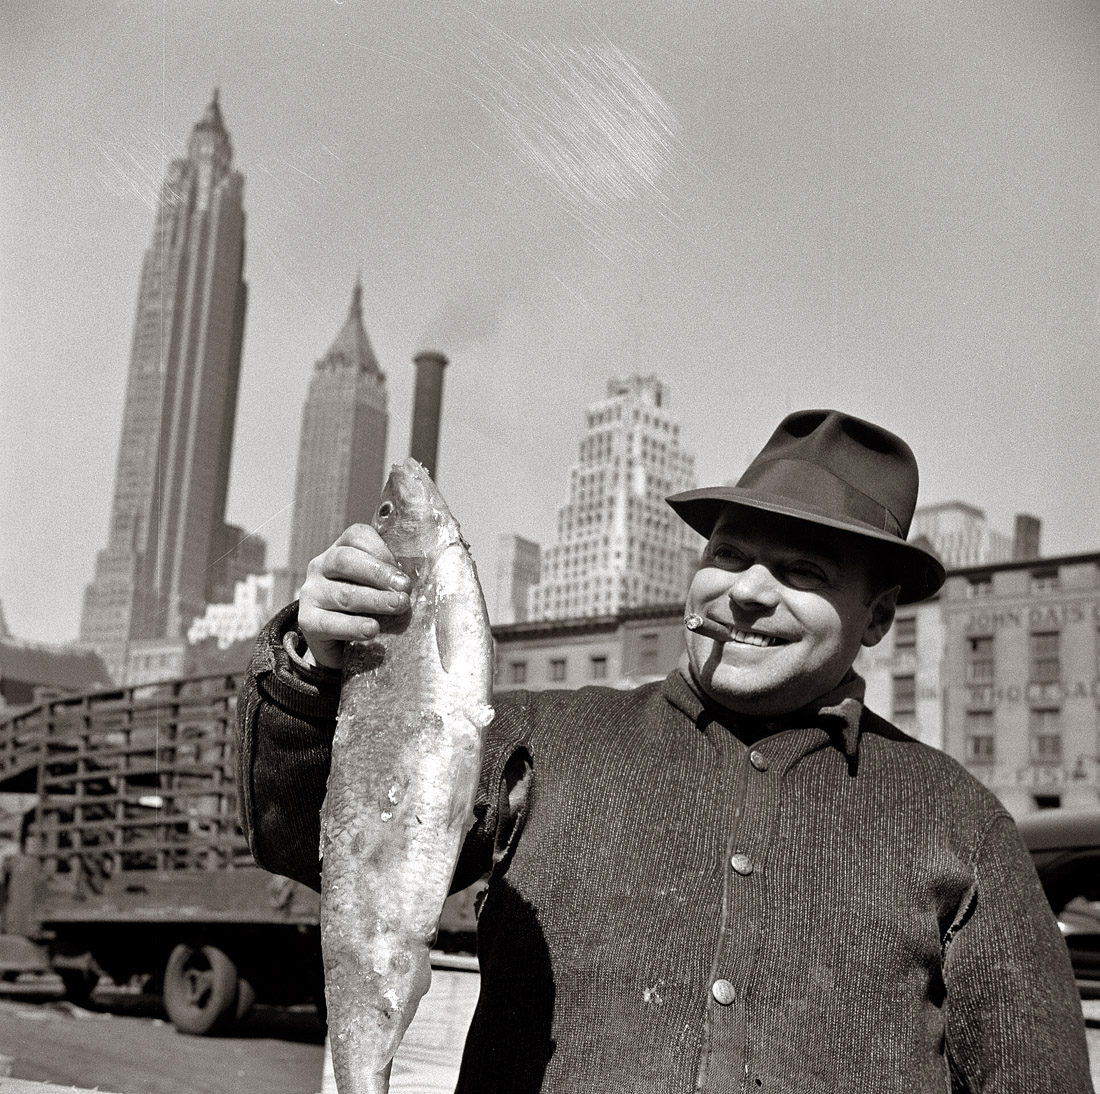 June 1943. Vendor at the Fulton Fish Market in New York City. View full size. Photograph by the legendary Gordon Parks, back when he was just starting out.